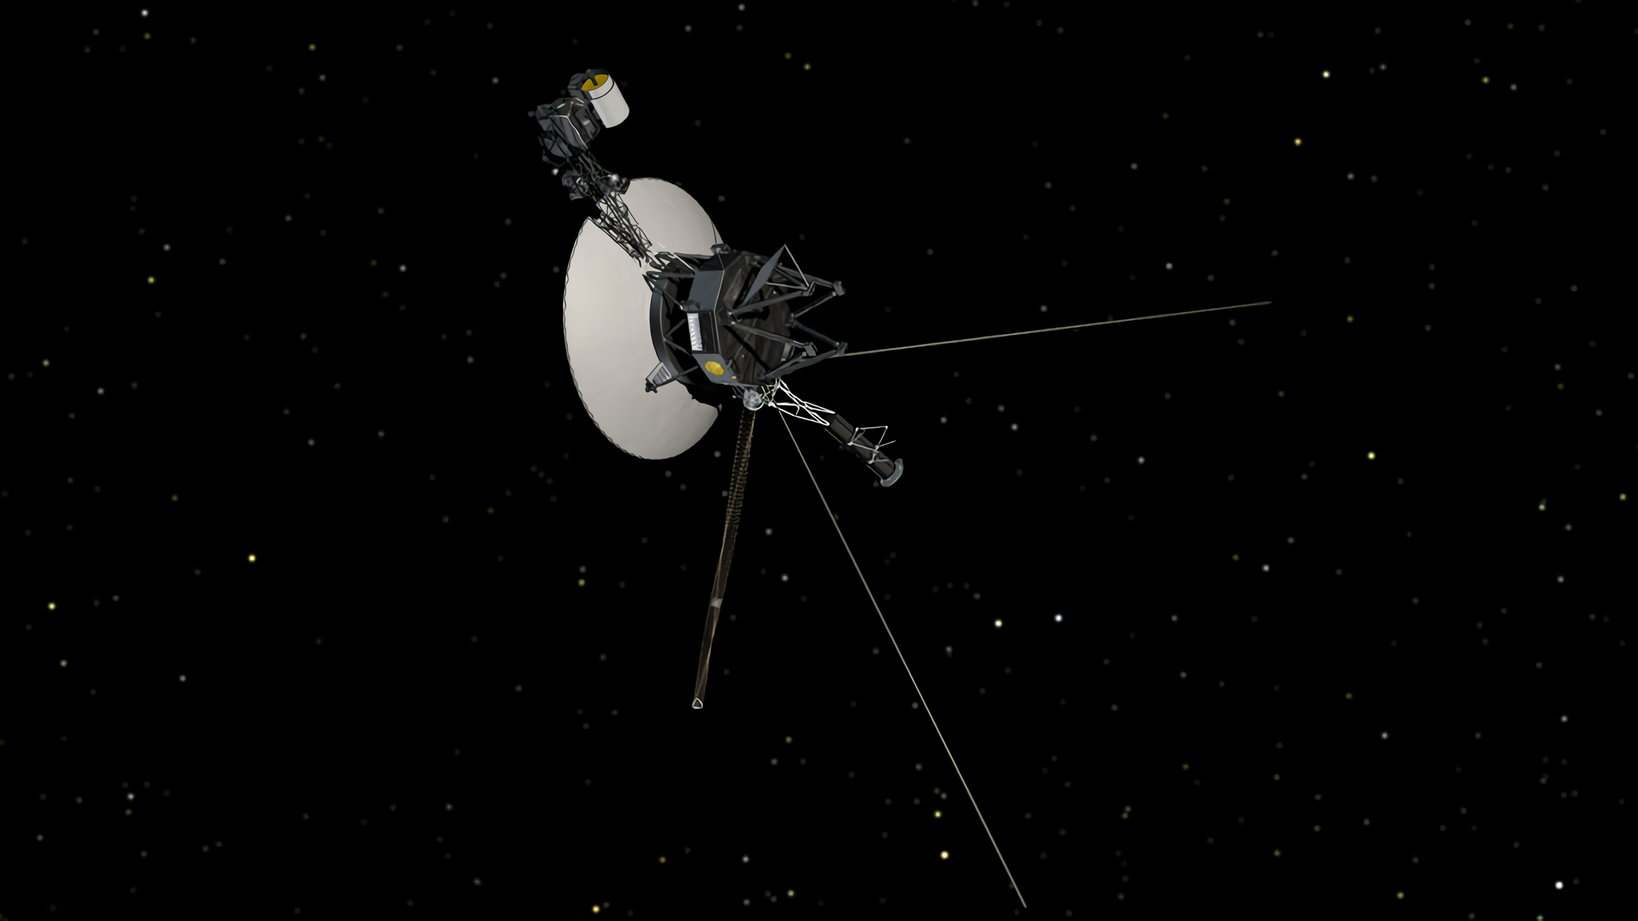 NASA accidentally instructs Voyager 2 to turn its antenna away from Earth